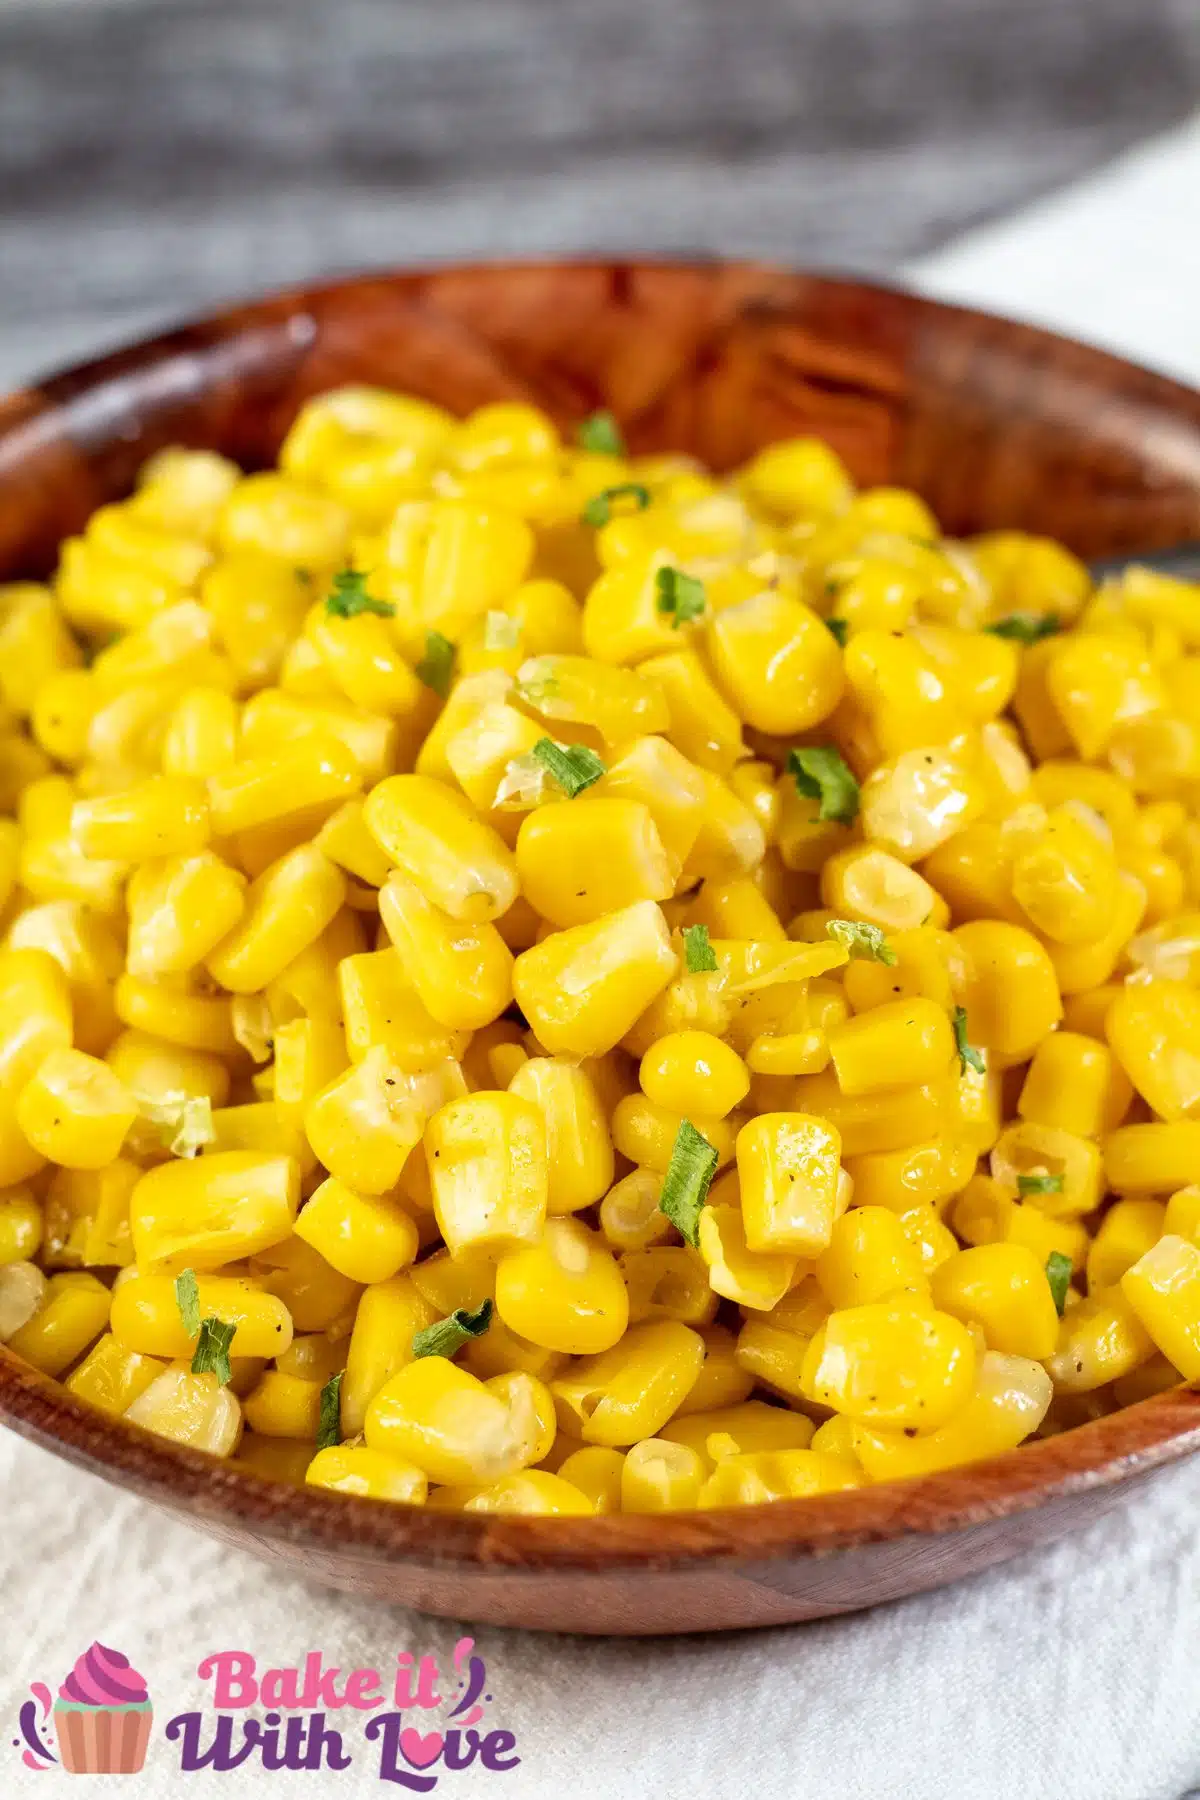 Tall image showing cooked canned corn in a wooden bowl.